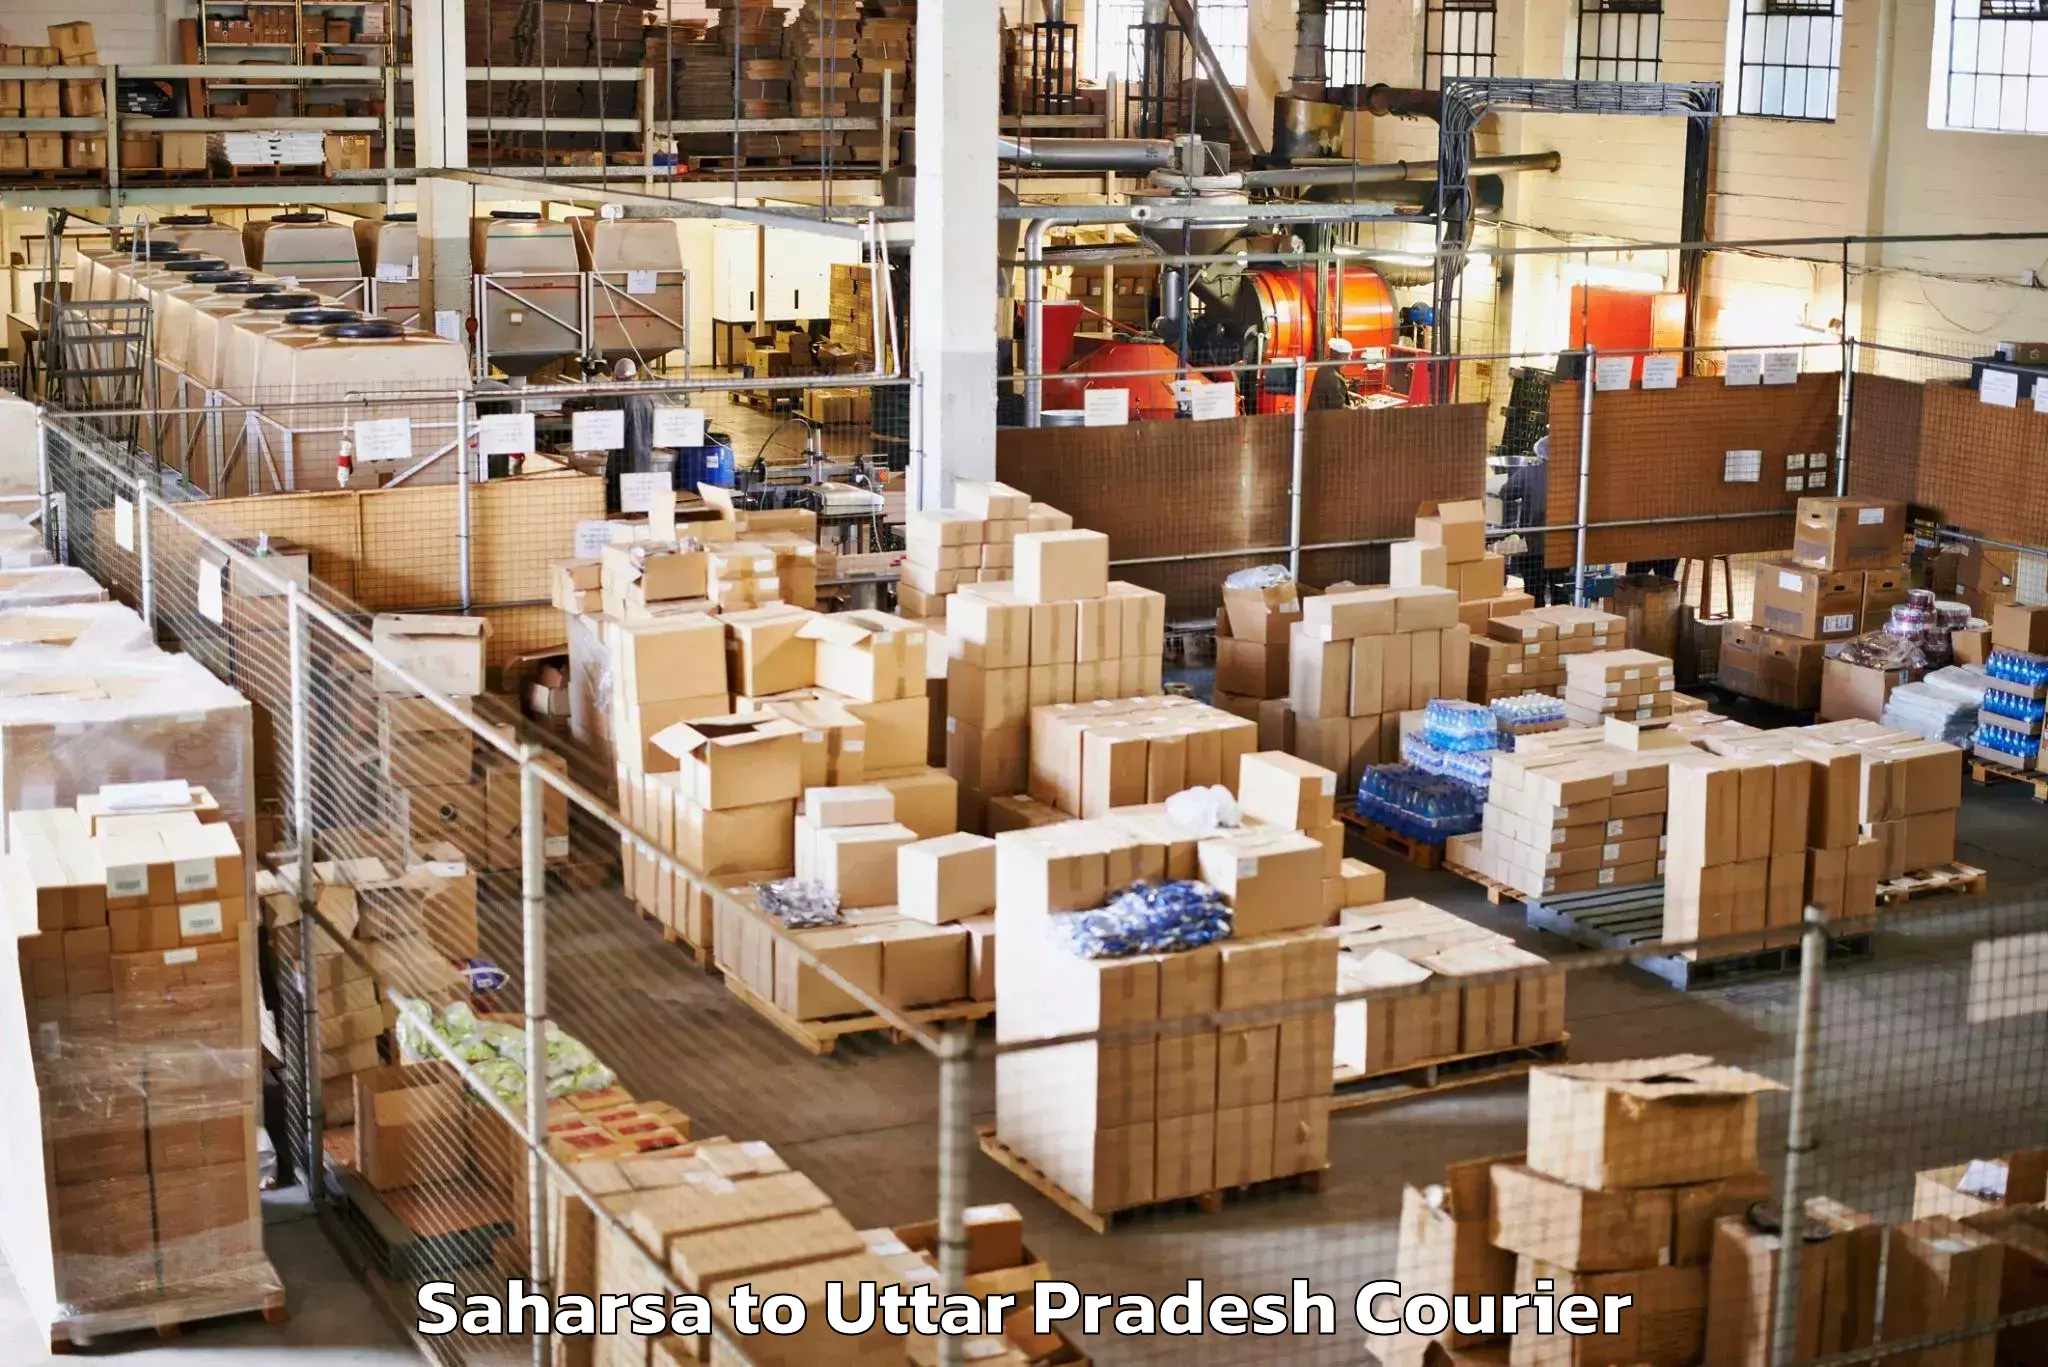 Luggage shipping planner Saharsa to Aligarh